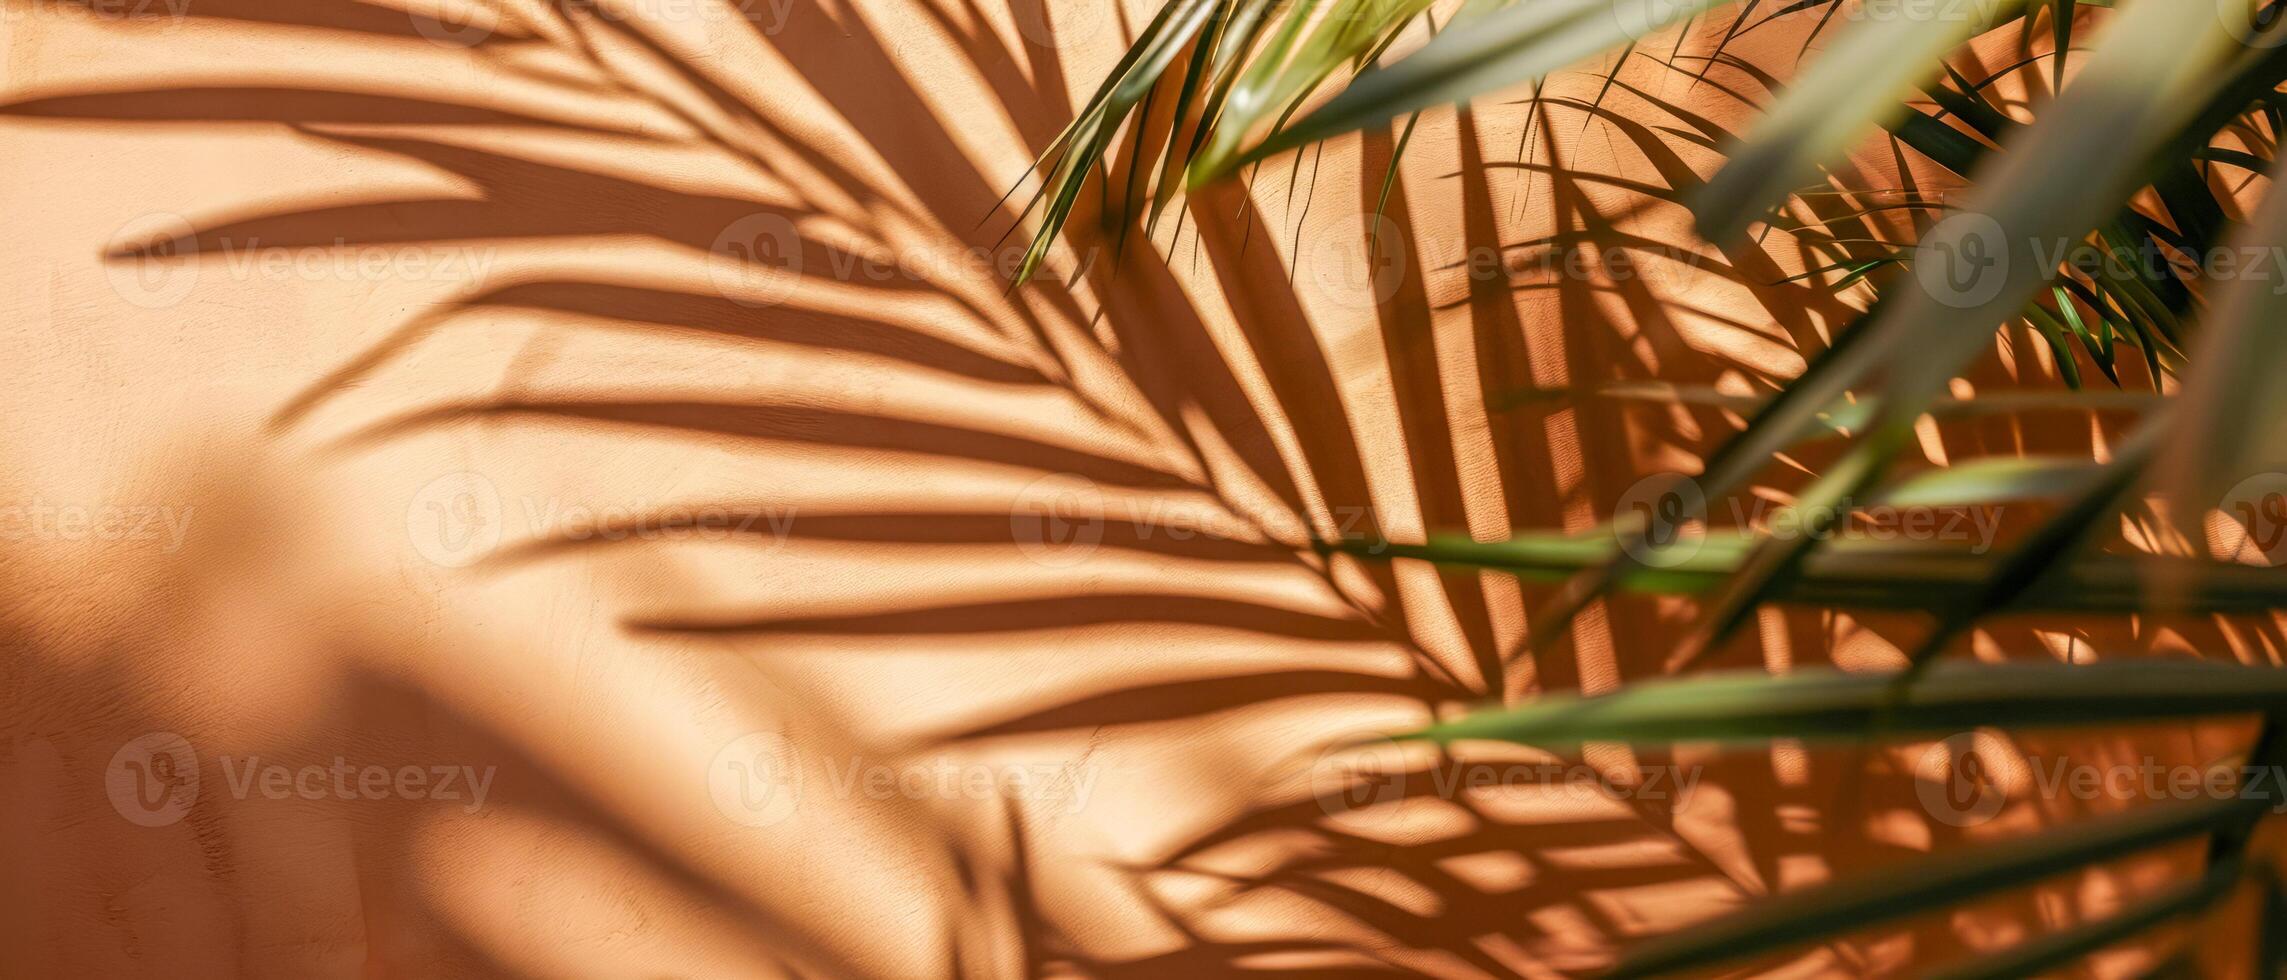 AI generated The interplay of light and shadow from tropical palm leaves creates an artistic pattern on a warm, textured wall photo